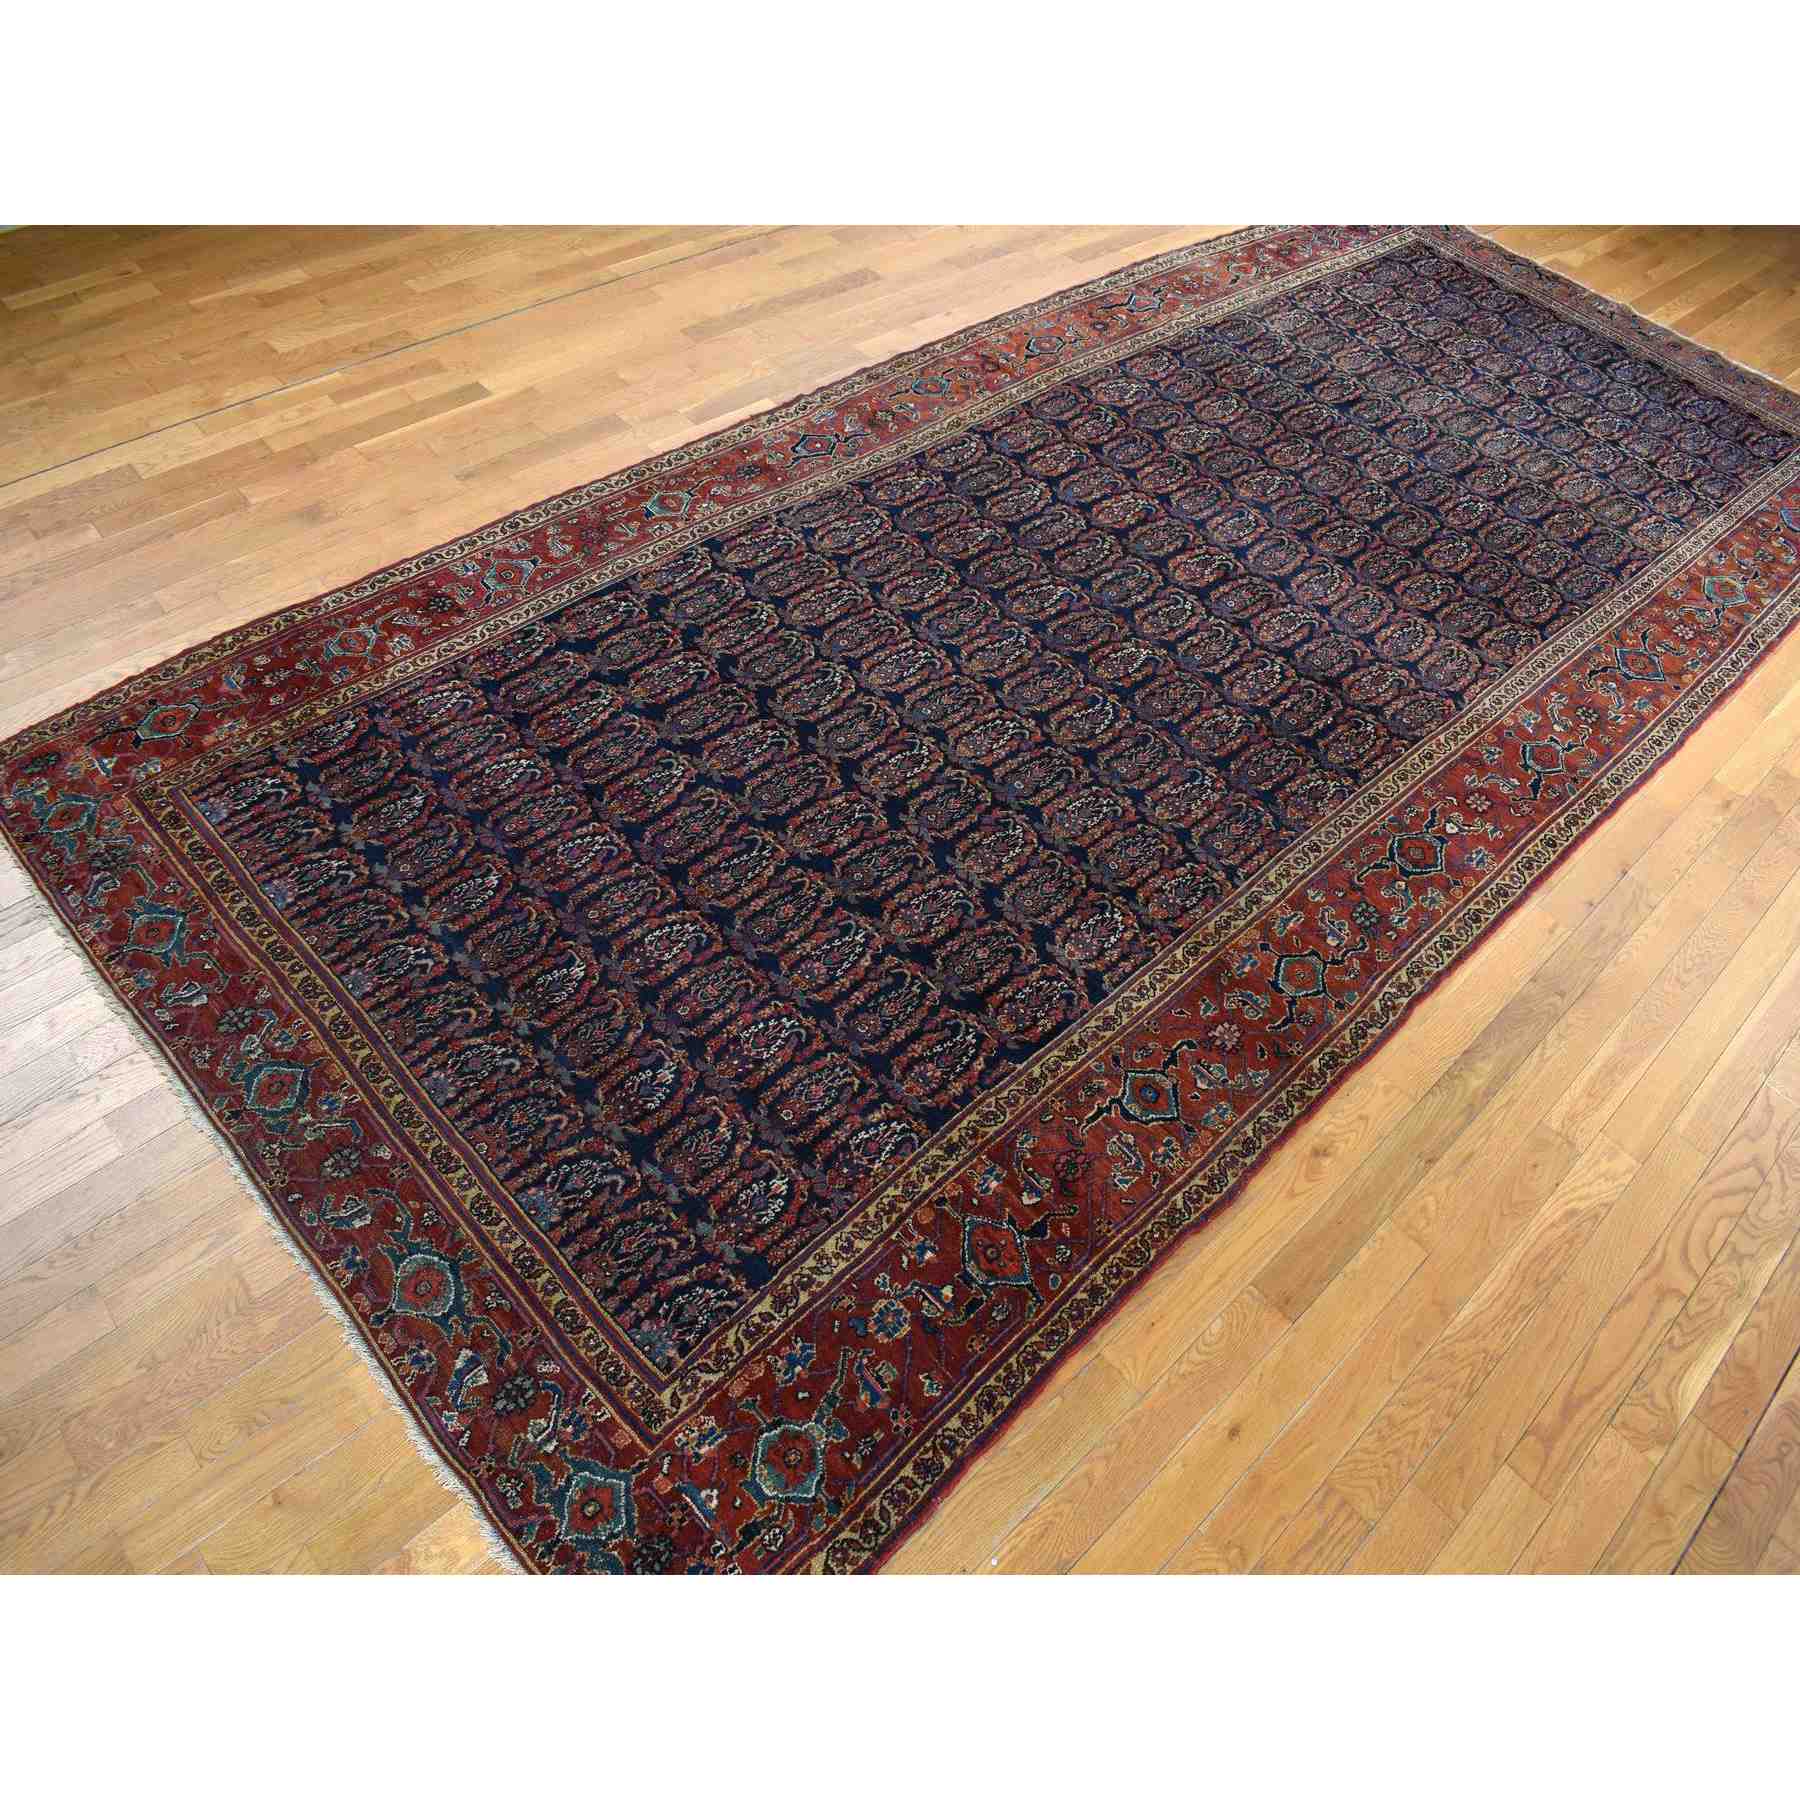 Antique-Hand-Knotted-Rug-390440